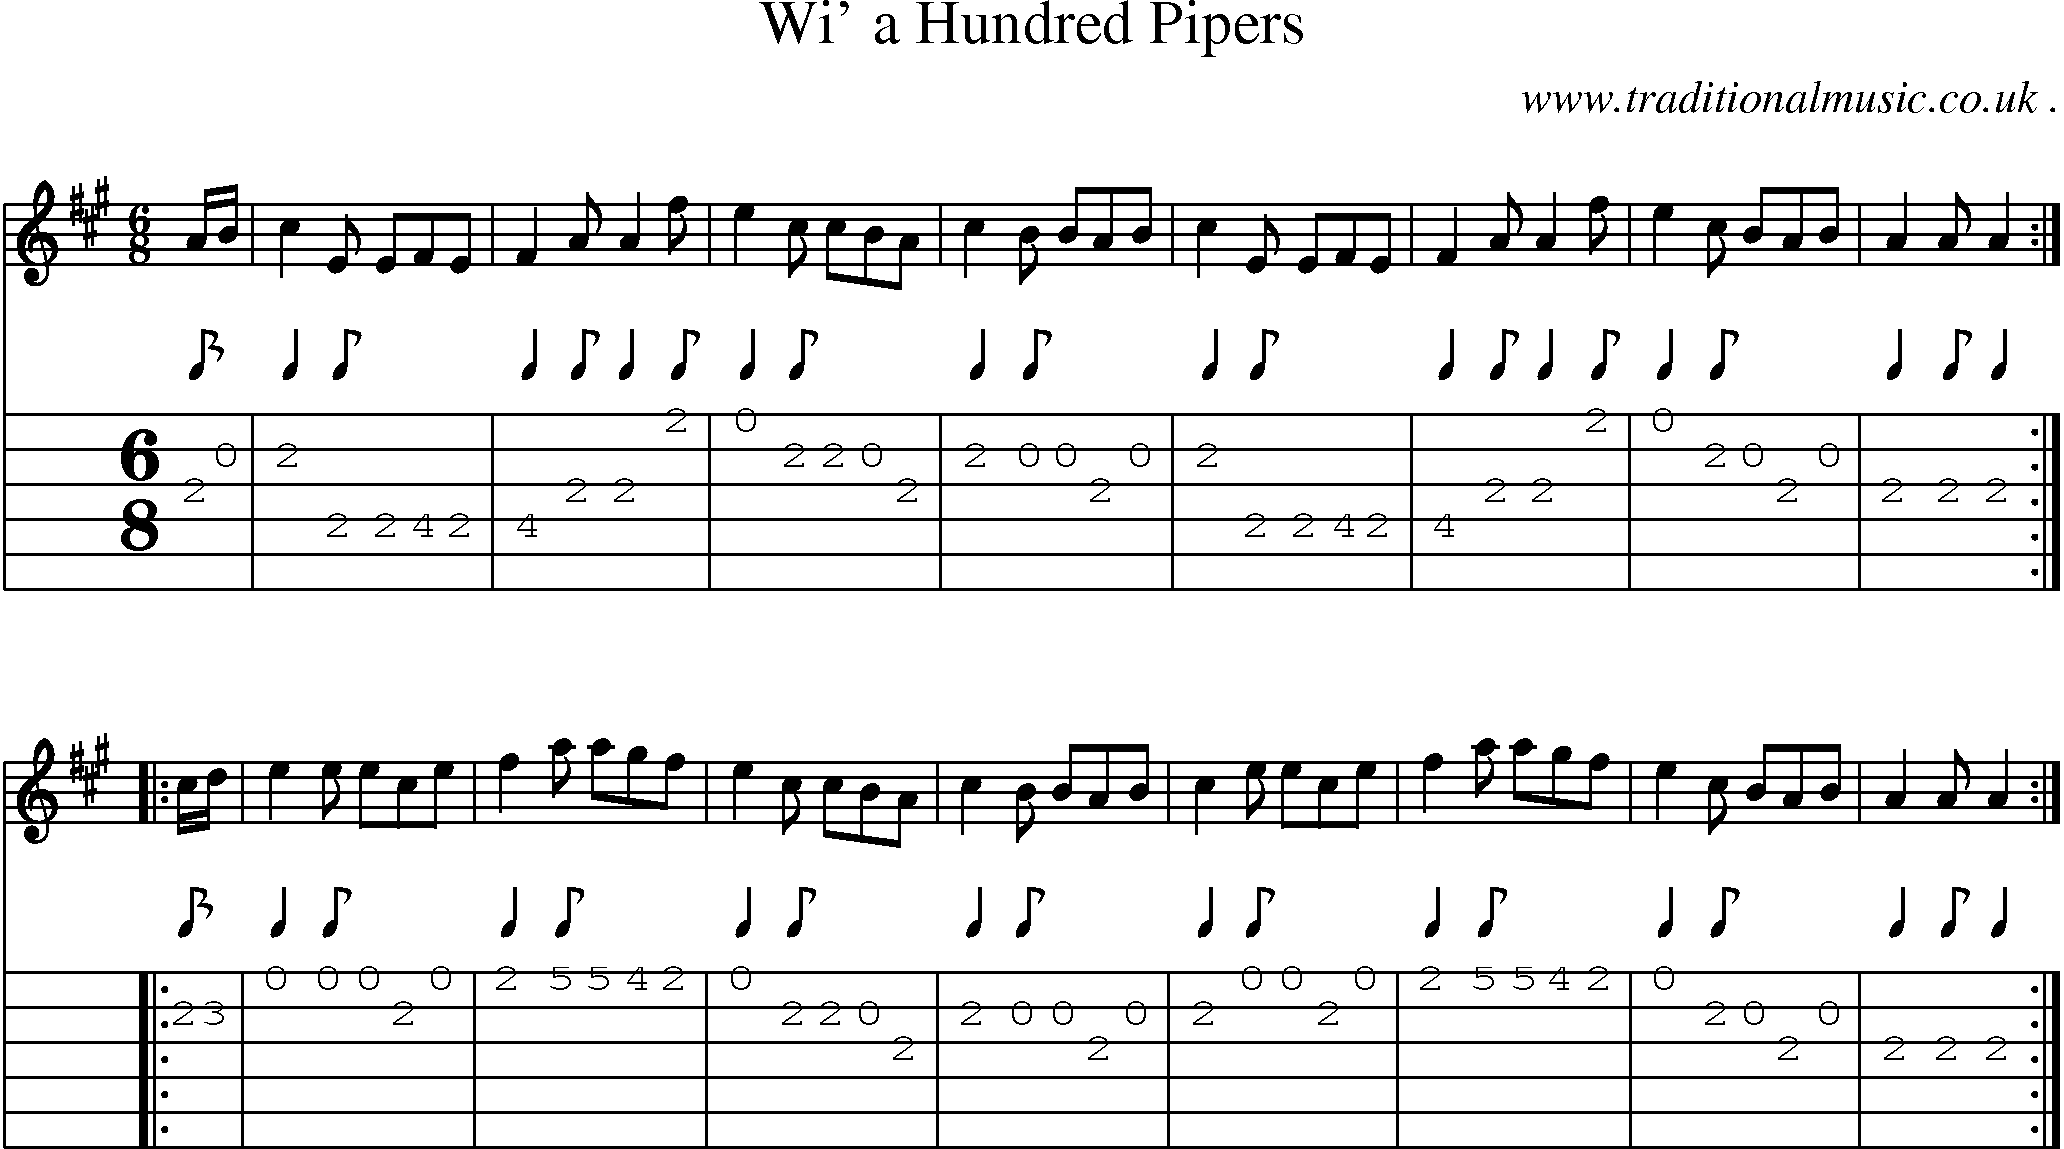 Sheet-music  score, Chords and Guitar Tabs for Wi A Hundred Pipers1